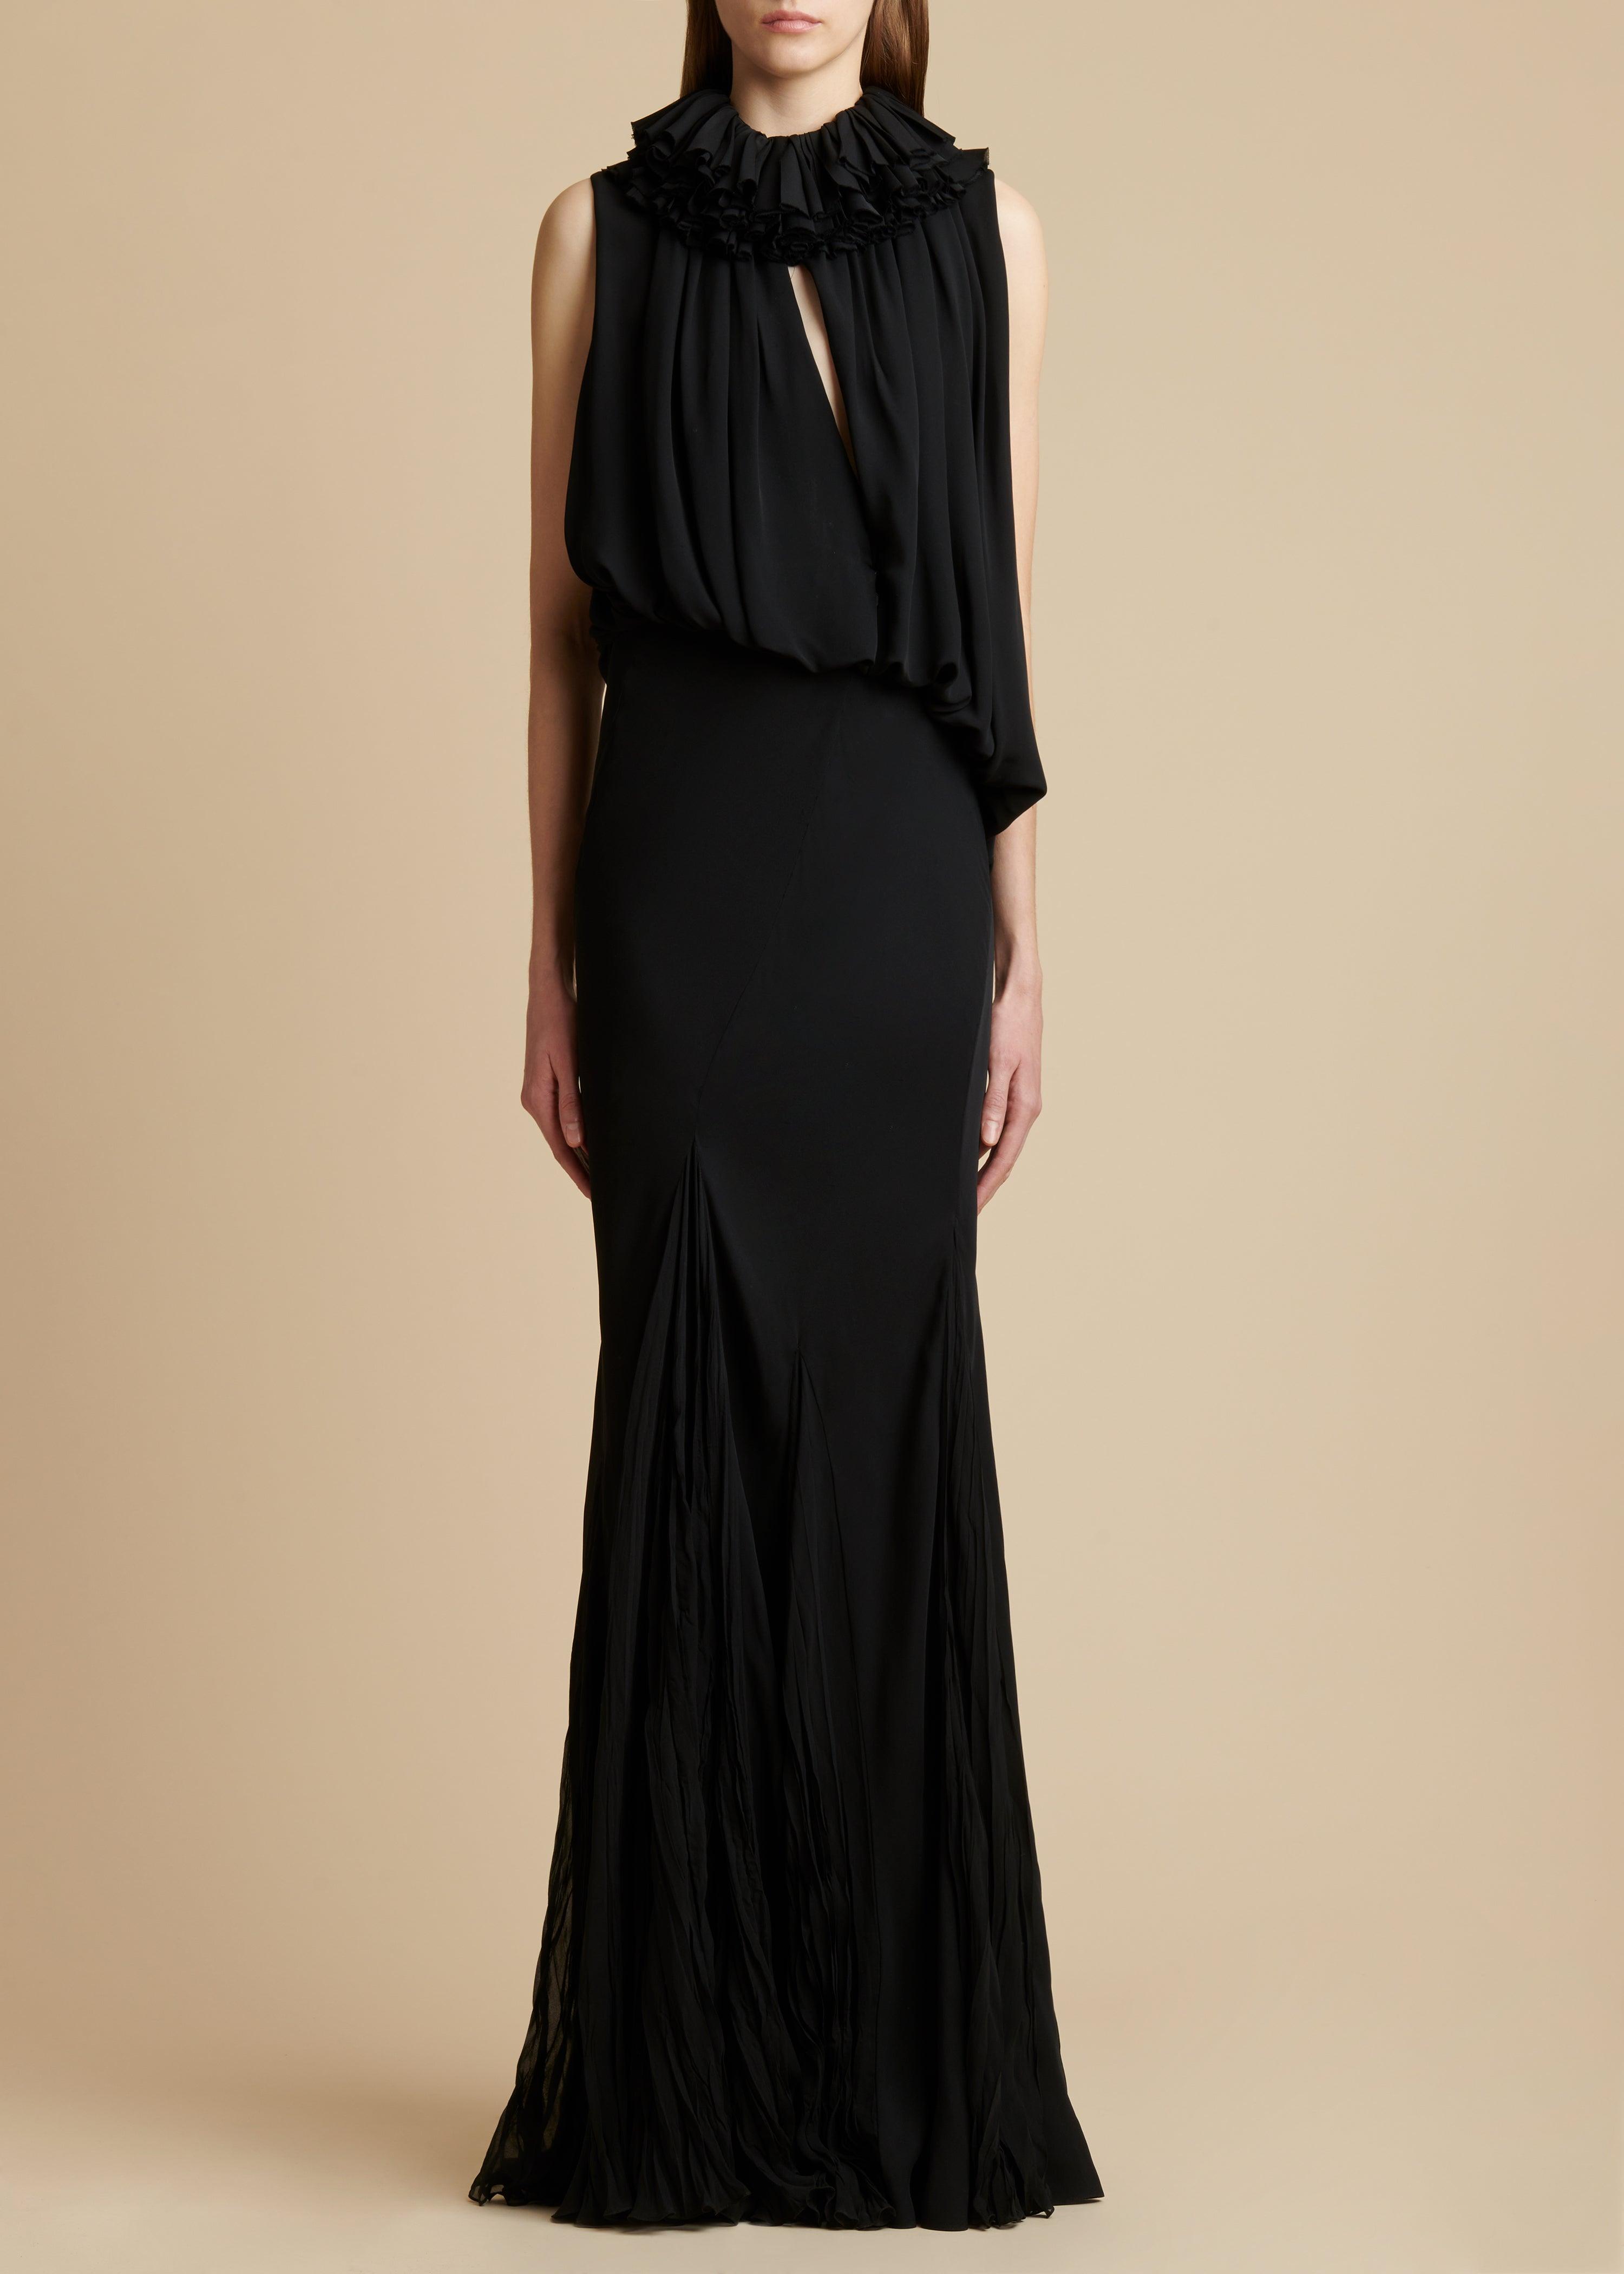 The Greco Dress in Black - The Iconic Issue